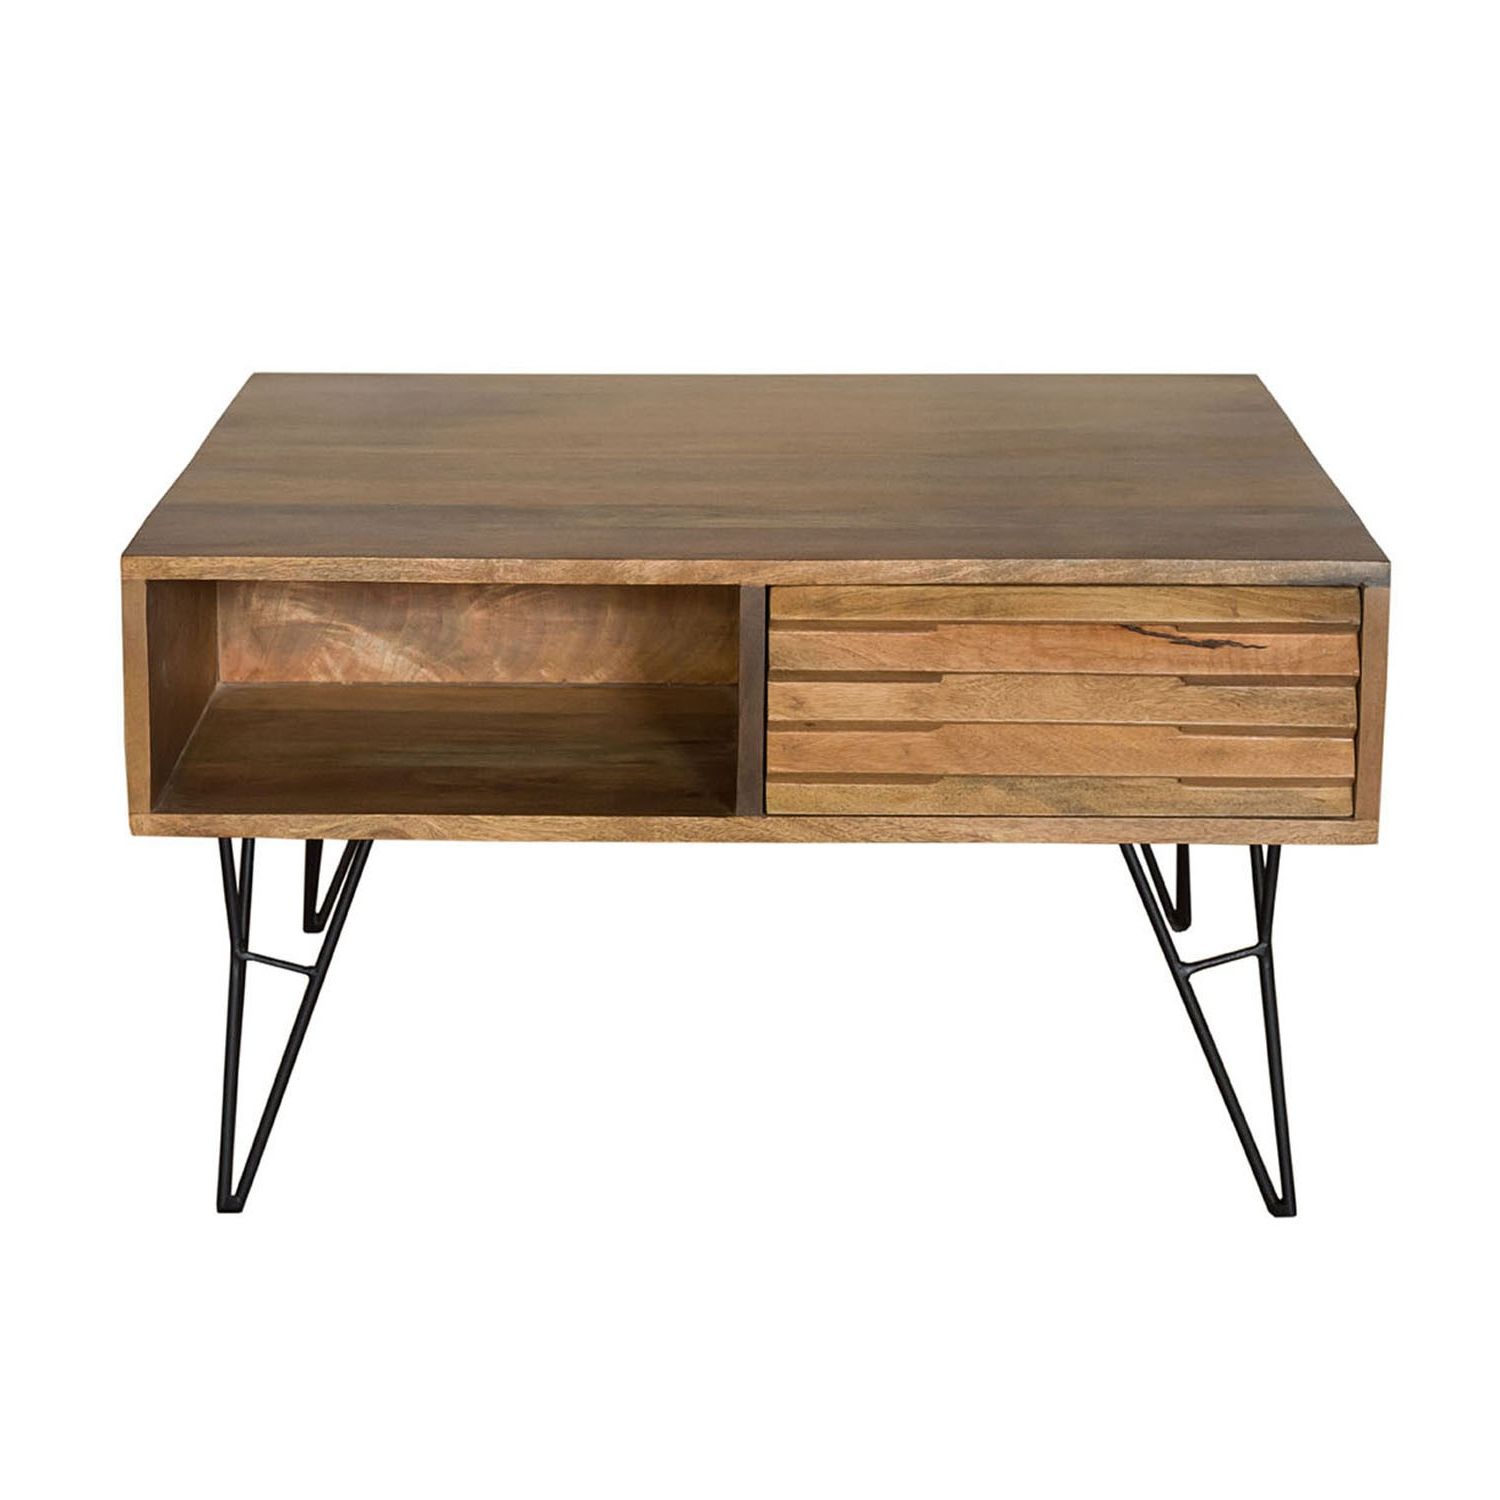 Widely Used Natural Mango Wood Coffee Tables With Shutter Coffee Table/iron & Mango Wood/natural Finish/32 (Gallery 13 of 20)